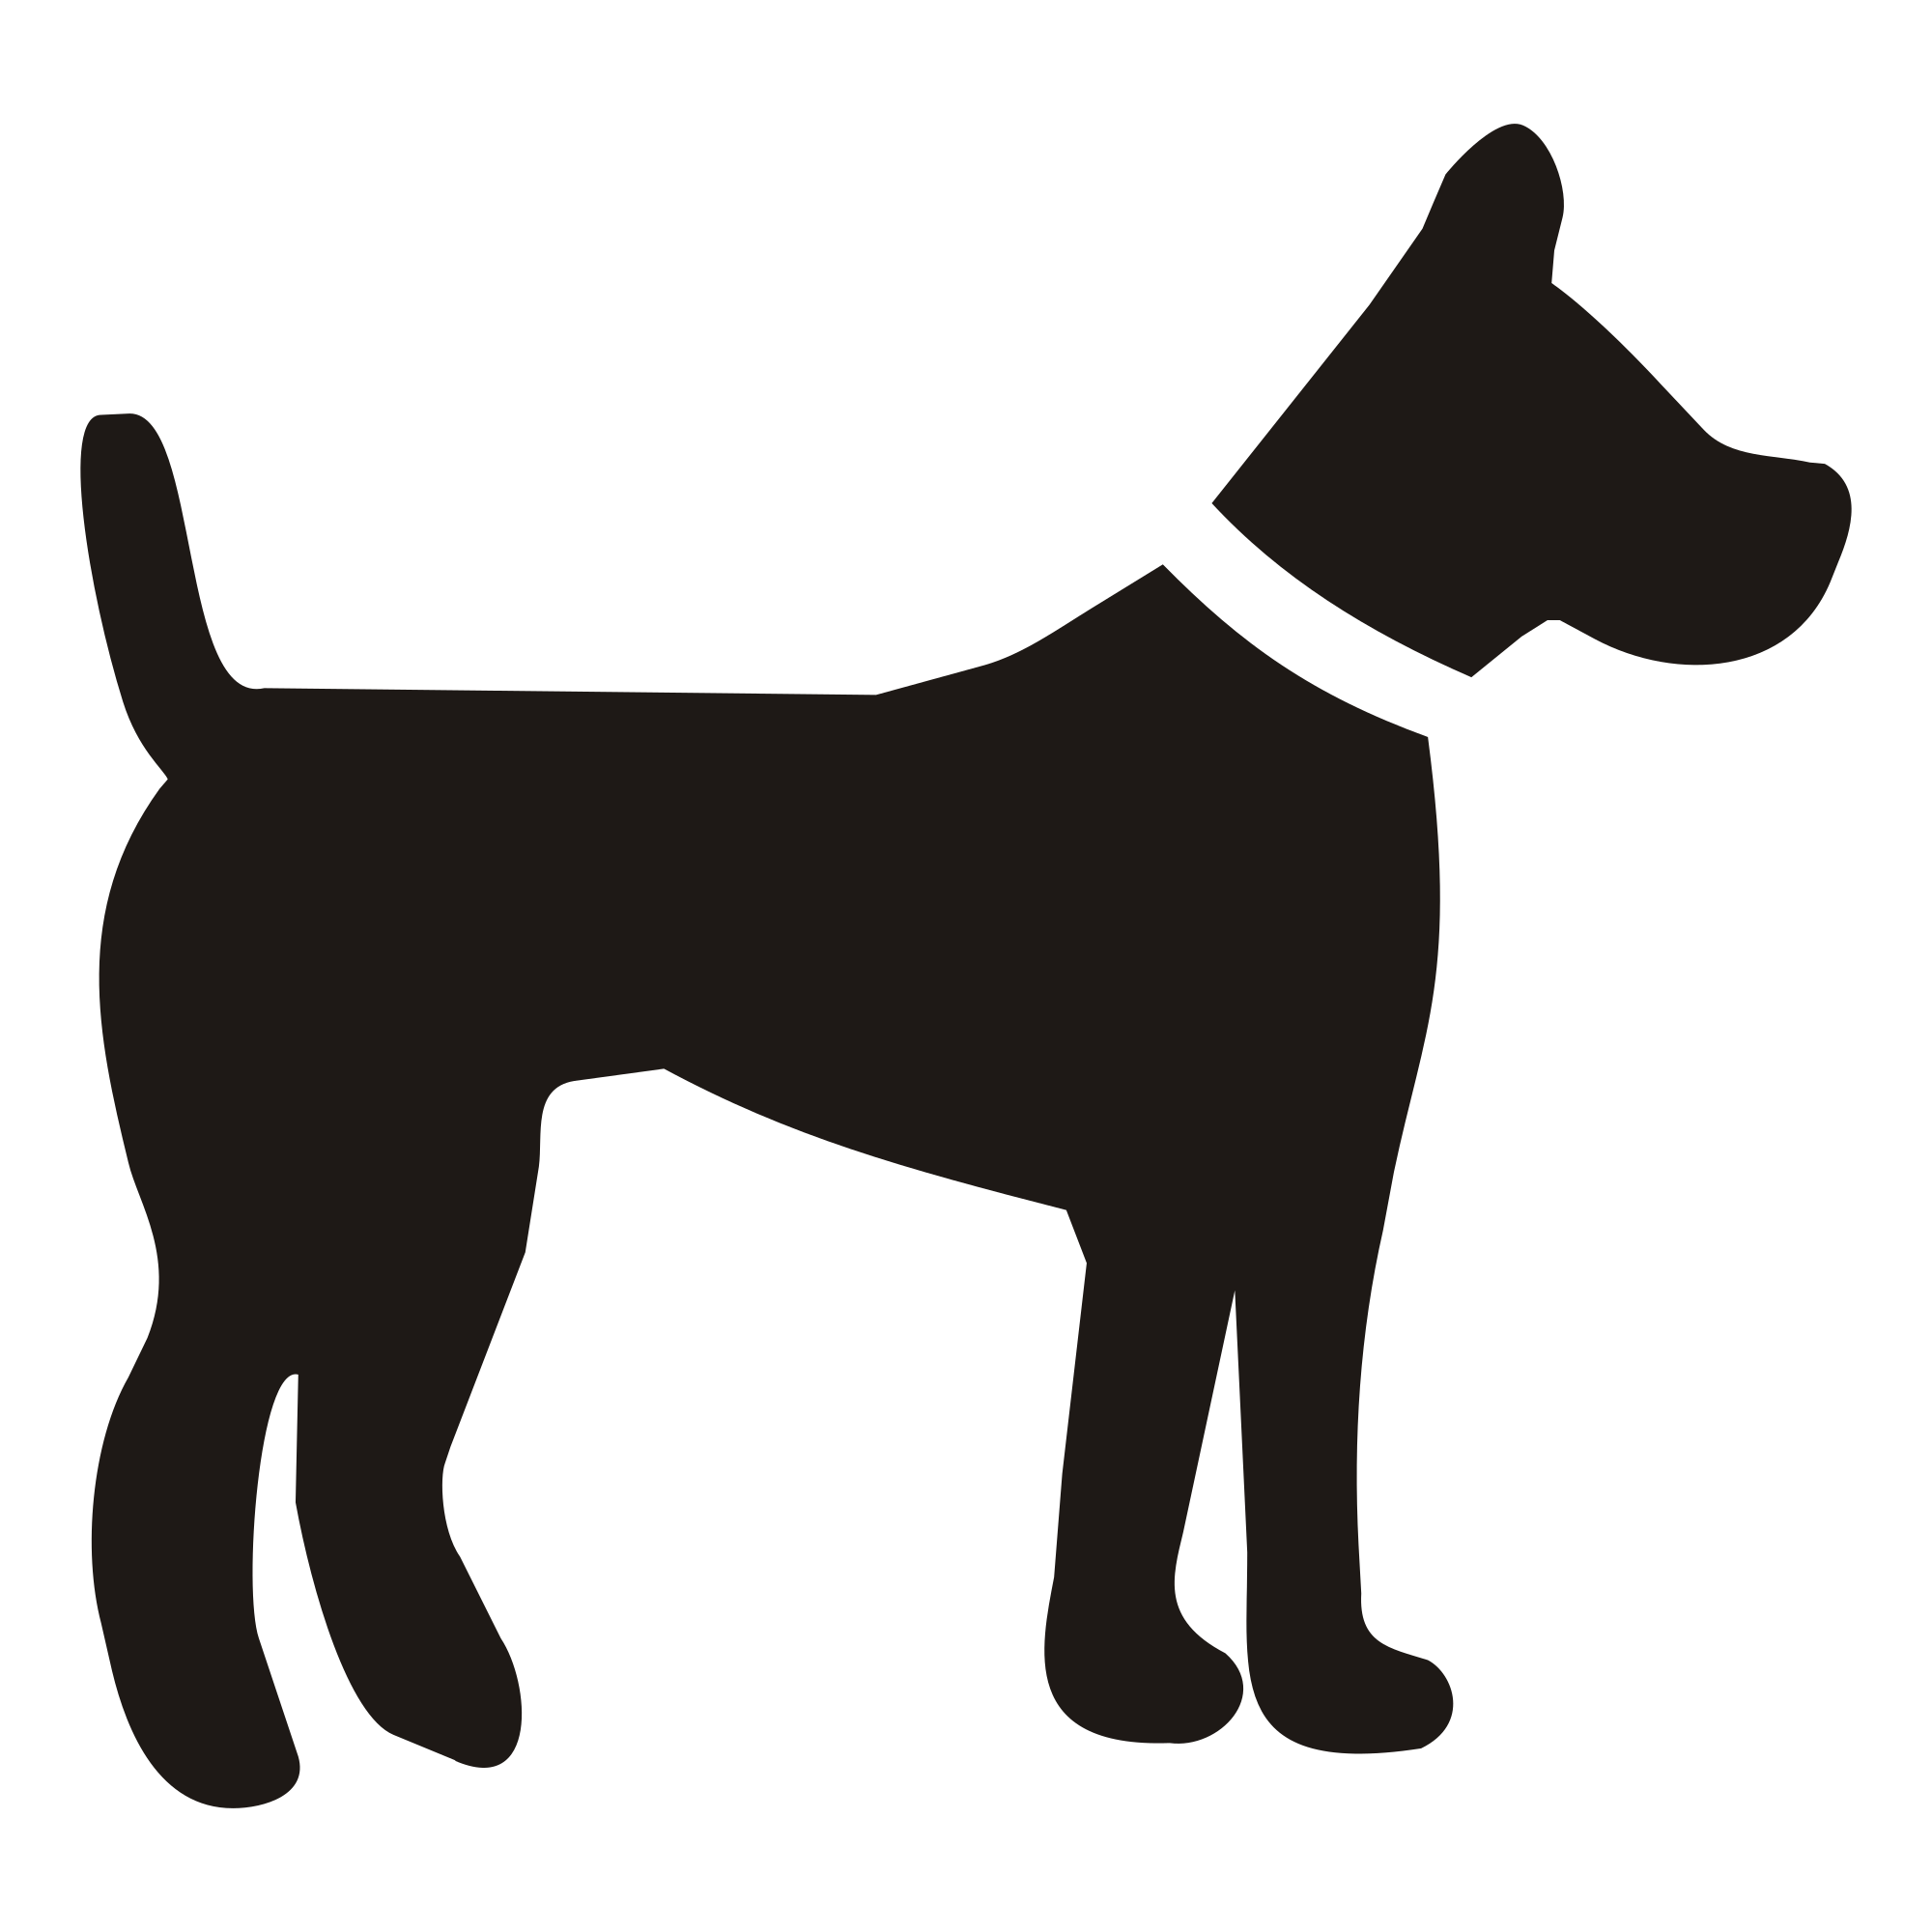 Dog Silhouette Svg at GetDrawings Free download